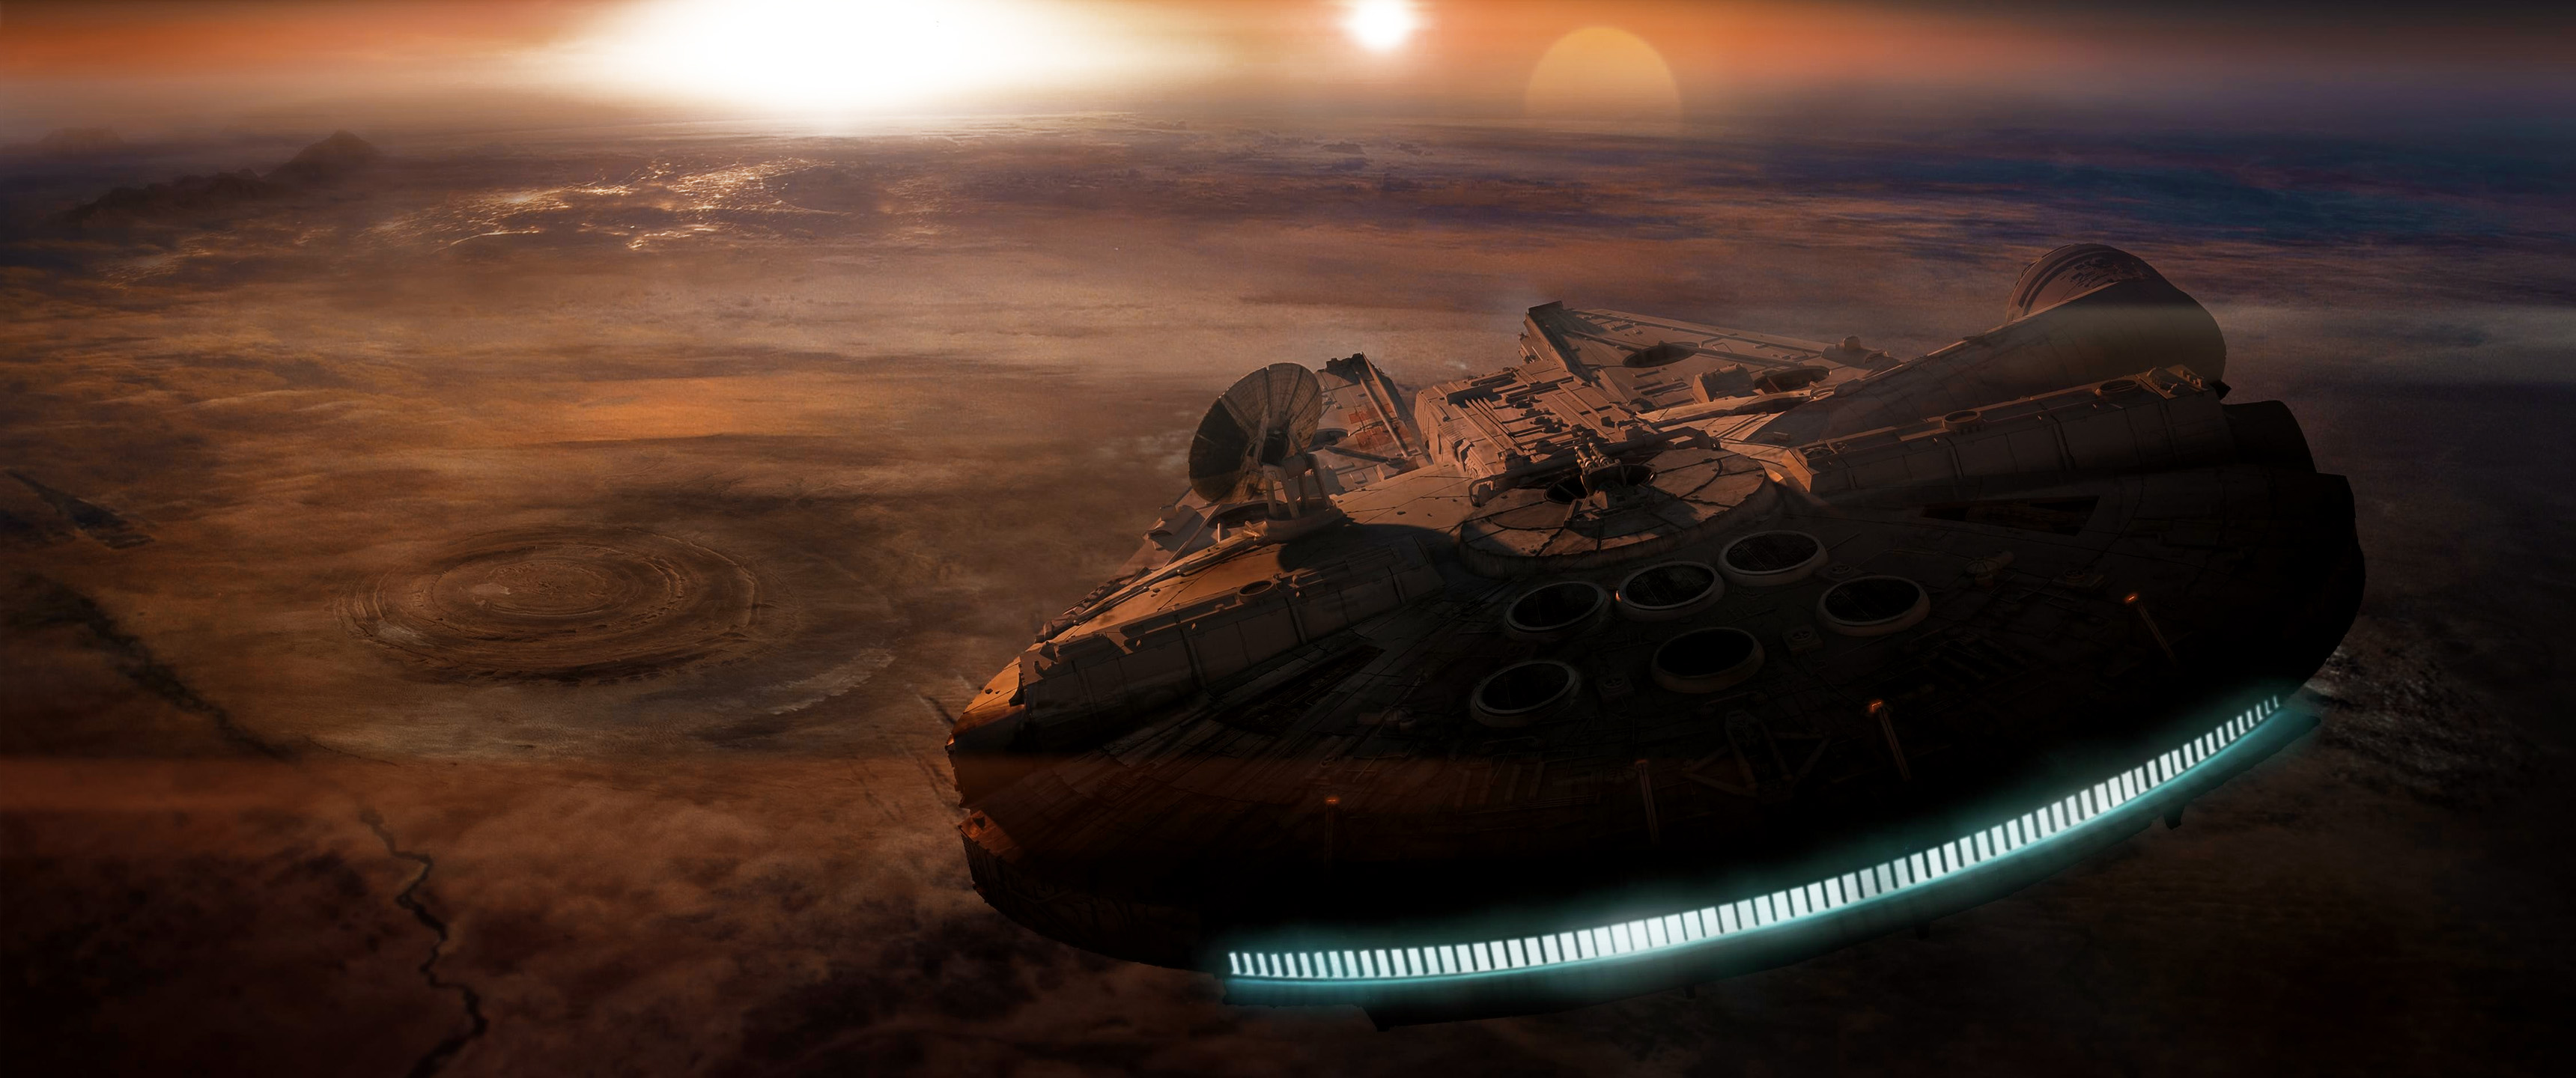 Free download Star Wars ultra widescreen backgrounds Album on Imgur